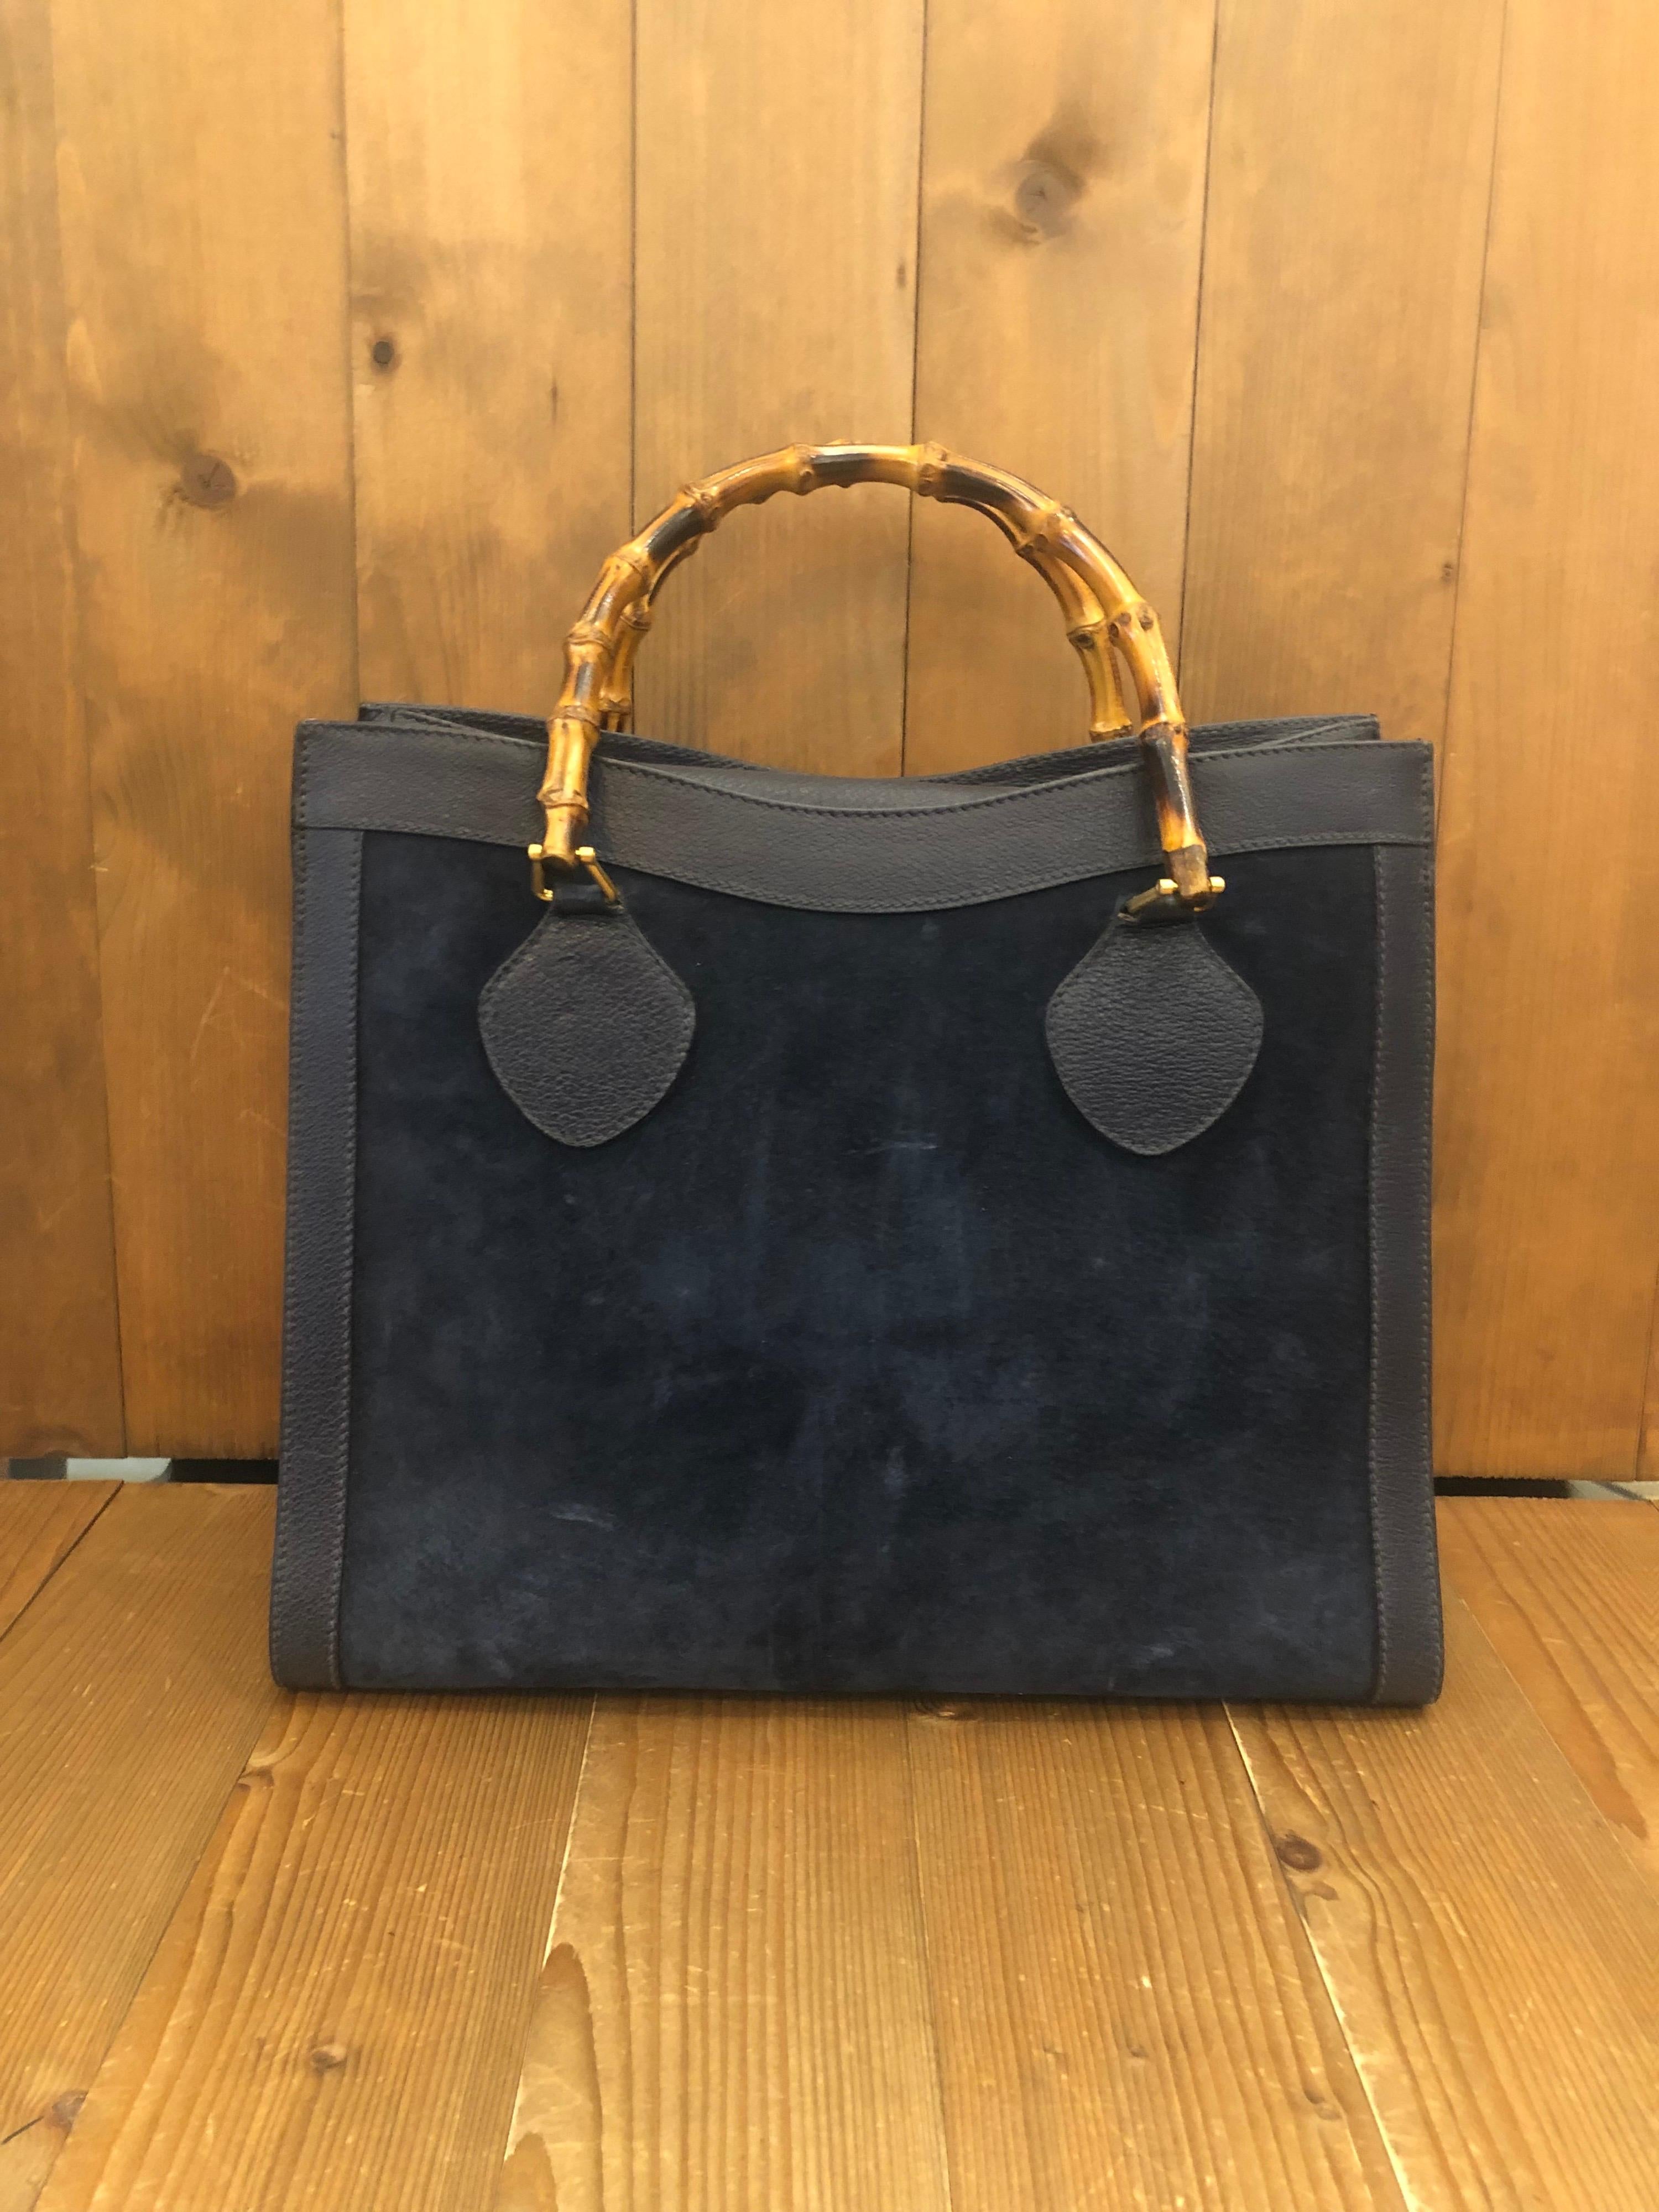 1990s Gucci bamboo tote in navy suede and leather. The Bamboo tote is one of Princess Diana's favorite purses. Interior fully refurbished and no more flakiness. Gucci revamped this bamboo tote in 2021 winter collection. 

Material: